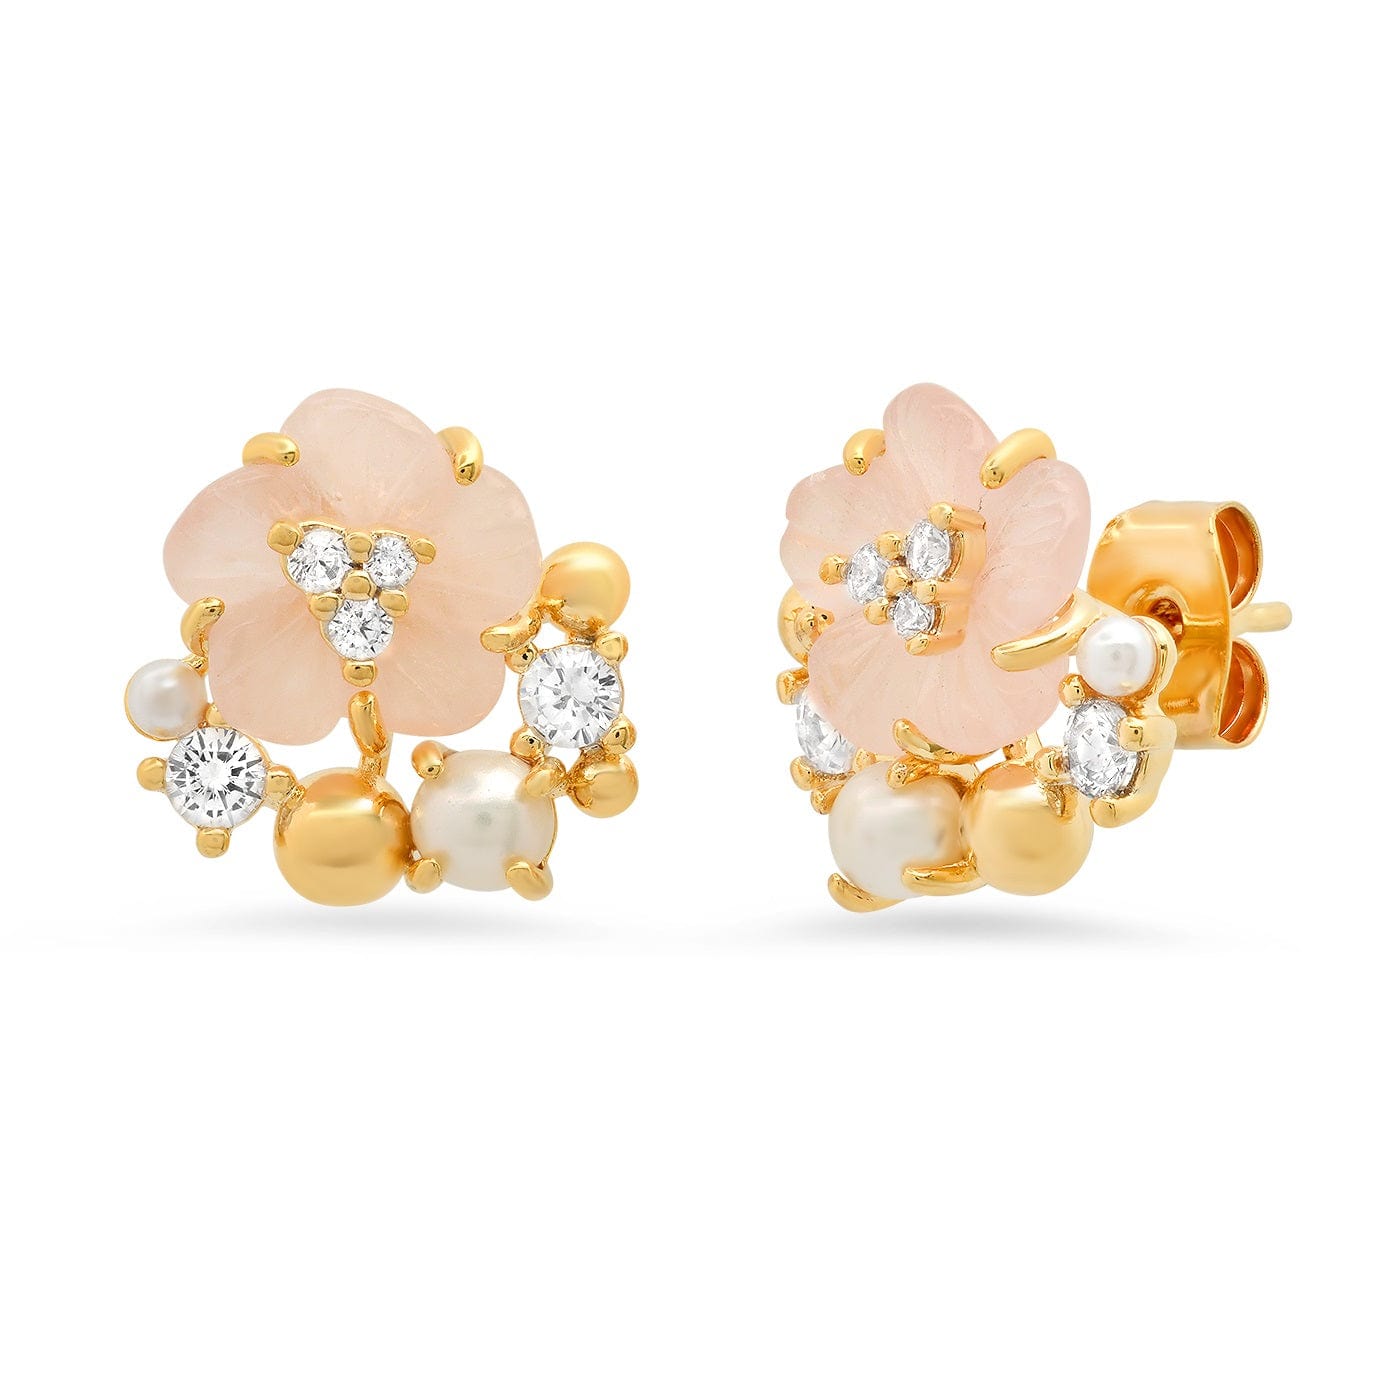 TAI JEWELRY Earrings Glass Flower Stud With Pearl Accents